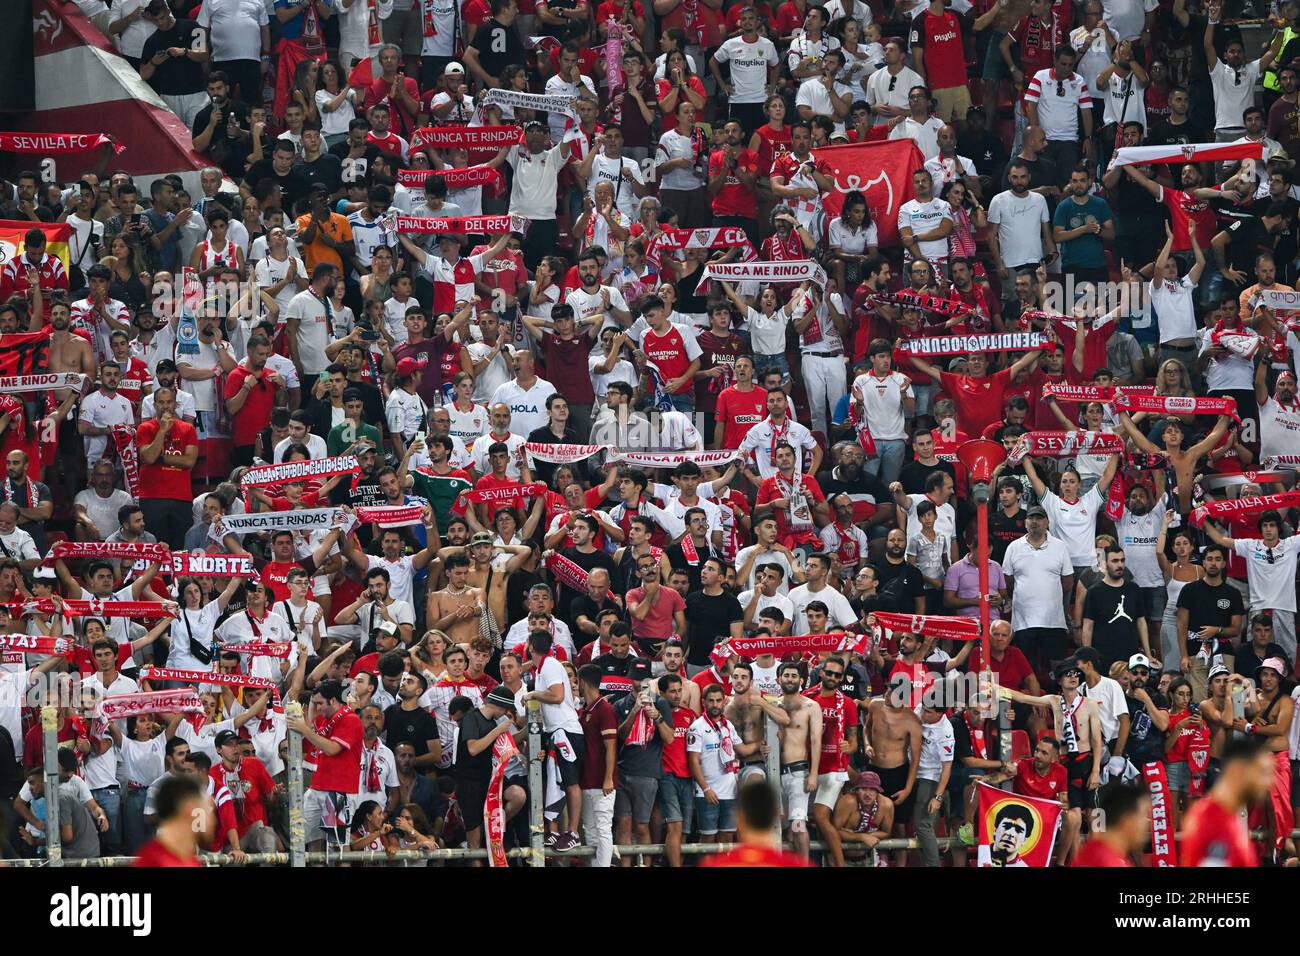 Piraeus, Greece. 16 August, 2023: The fans of Sevilla support their team after the defeat during the UEFA Super Cup 2023 match between Manchester City FC and Sevilla FC at Georgios Karaiskakis Stadium in Piraeus, Greece. August 16, 2023. (Photo by Nikola Krstic/Alamy) Stock Photo